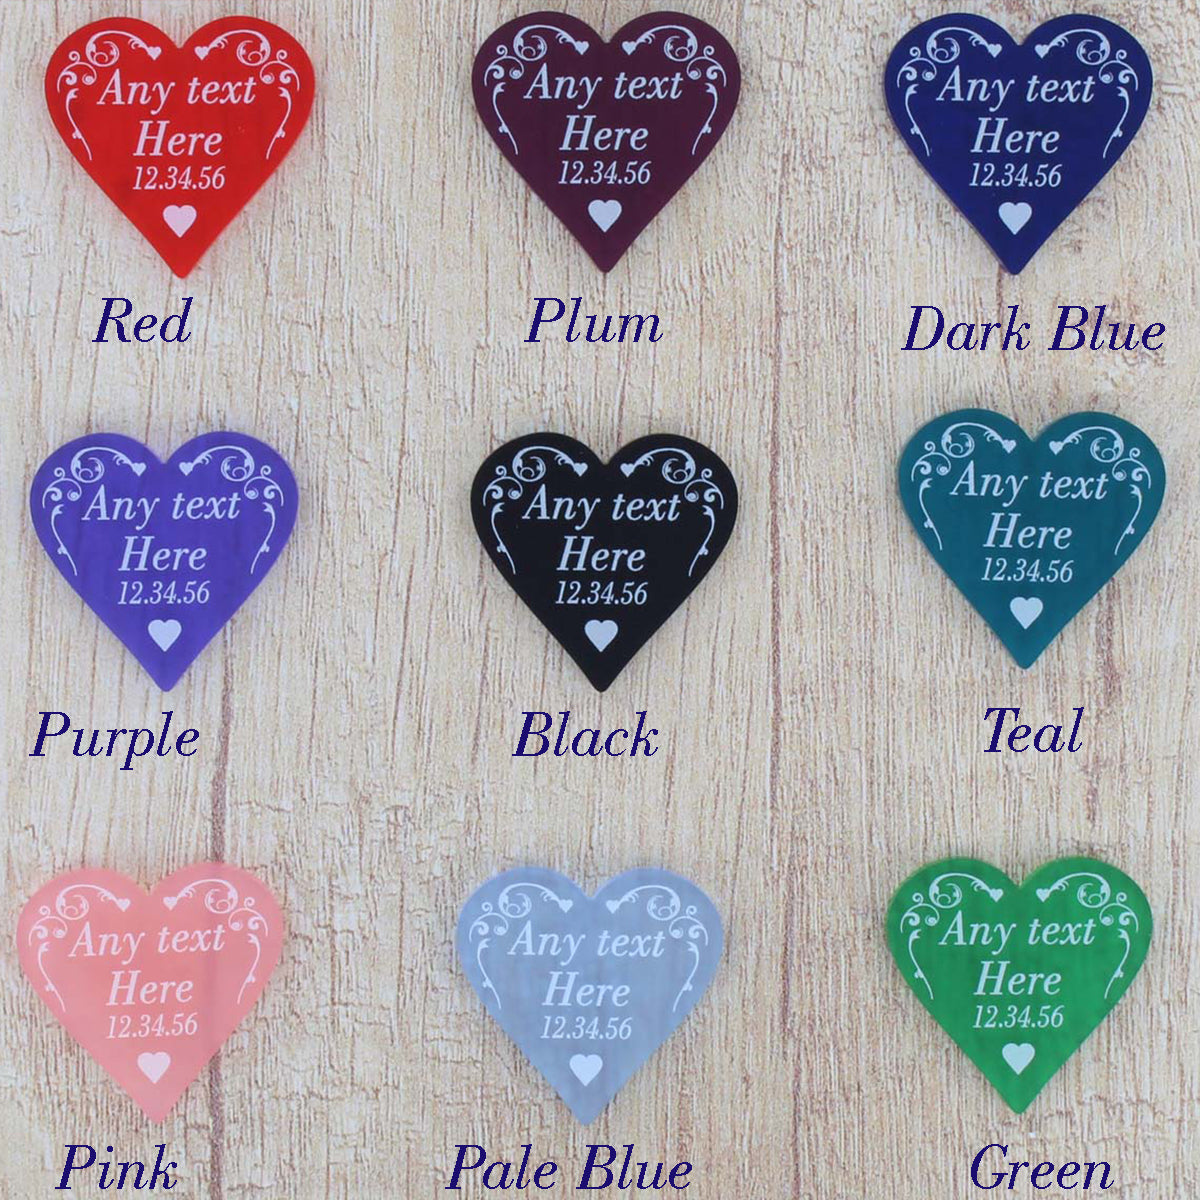 Personalised Wedding Favours - Frosted Black Acrylic Swirl Love Hearts